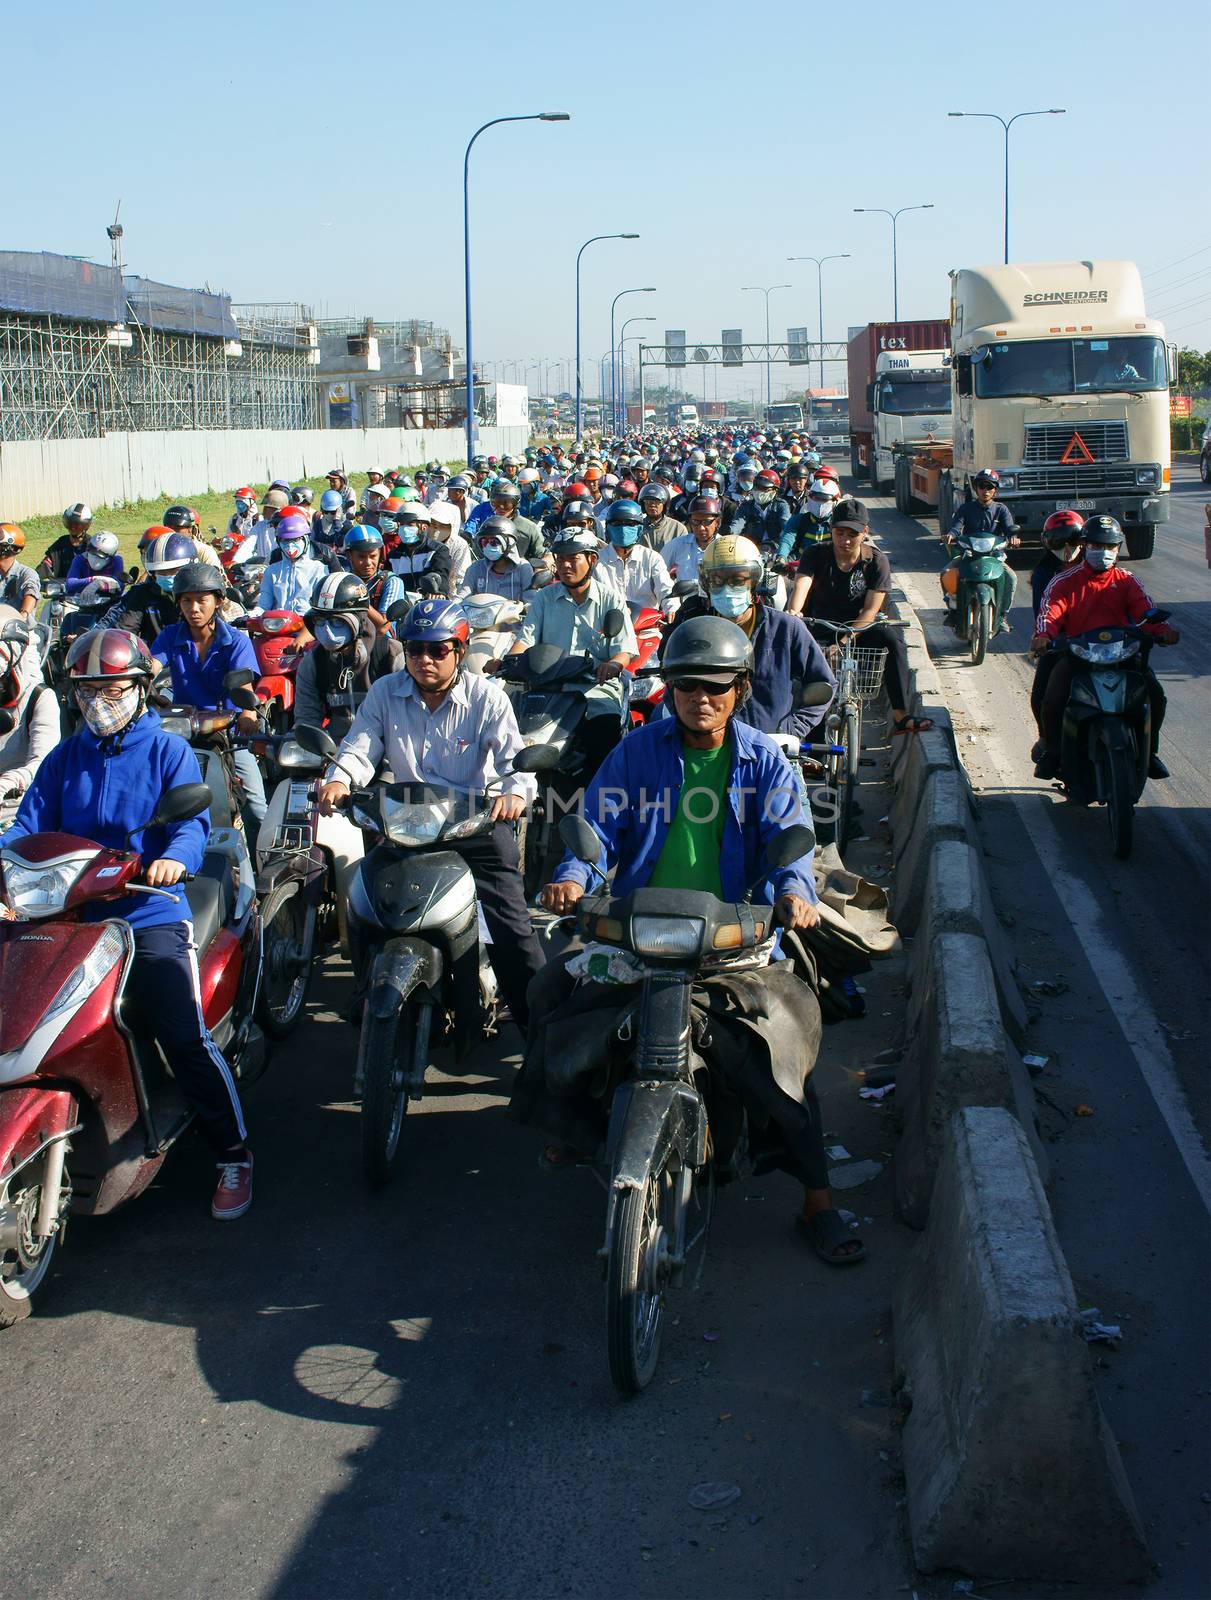 HO CHI MINH CITY, VIET NAM- NOV 19: Crowded situation on rush hour of Asian city, motorbikes in traffic jam, development make pressure on infrastucture, dusty, CO2, exhaust fumes, Vietnam, Nov19, 2015